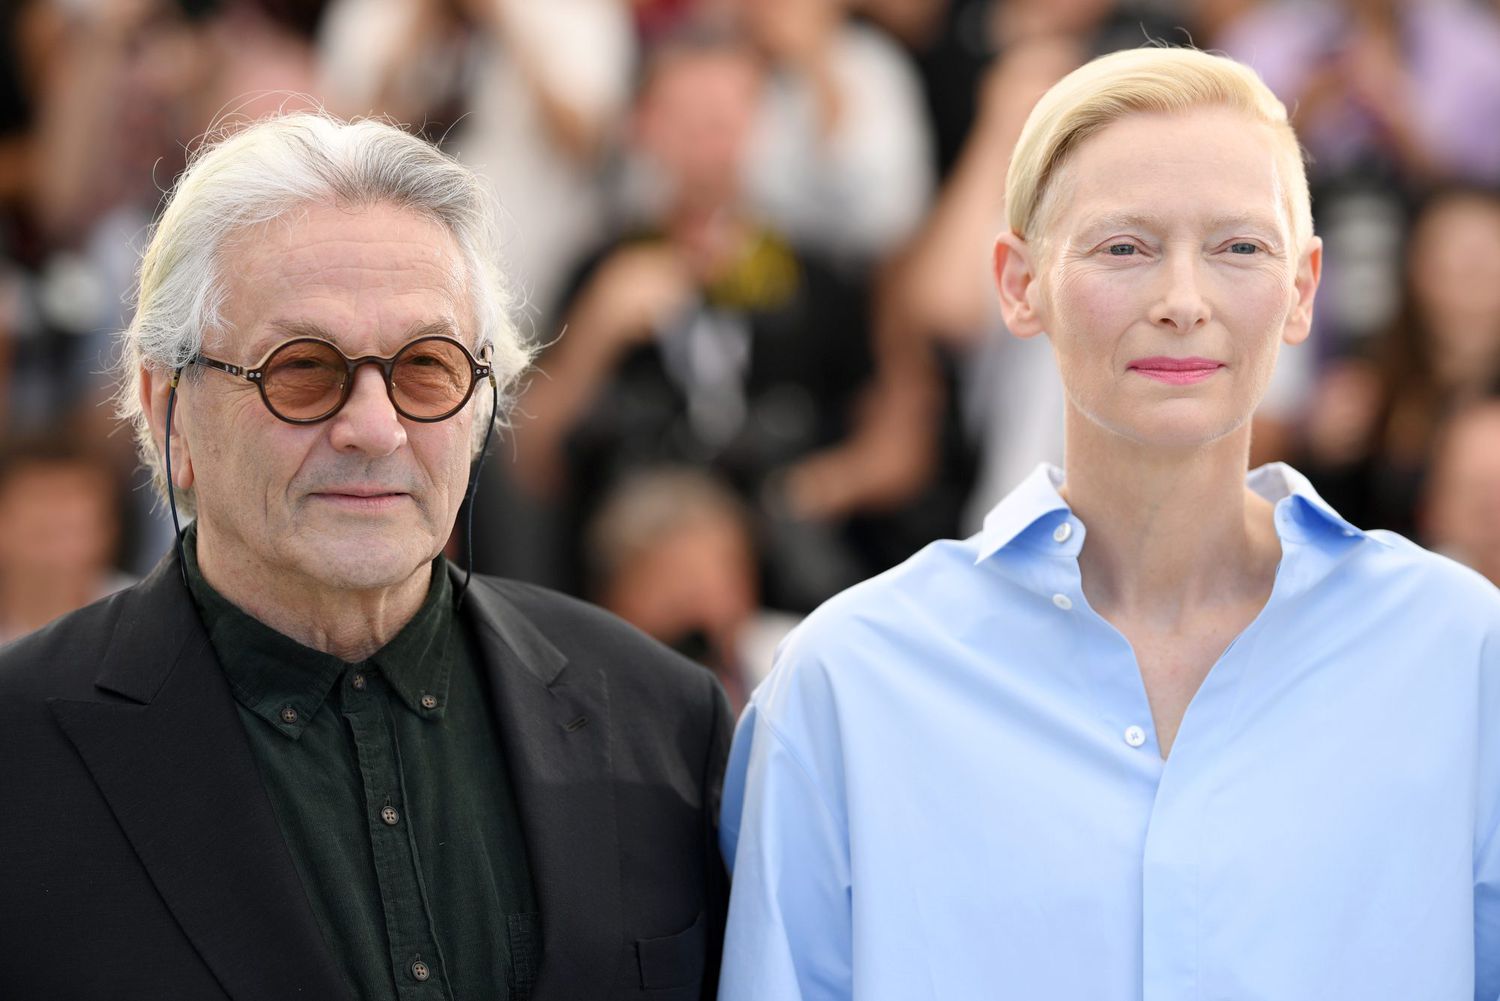 CANNES, FRANCE - MAY 21: (L to R) Director George Miller and Tilda Swinton attend the photocall for "Three Thousand Years Of Longing (Trois Mille Ans A T'Attendre)" during the 75th annual Cannes film festival at Palais des Festivals on May 21, 2022 in Cannes, France. (Photo by Pascal Le Segretain/Getty Images)